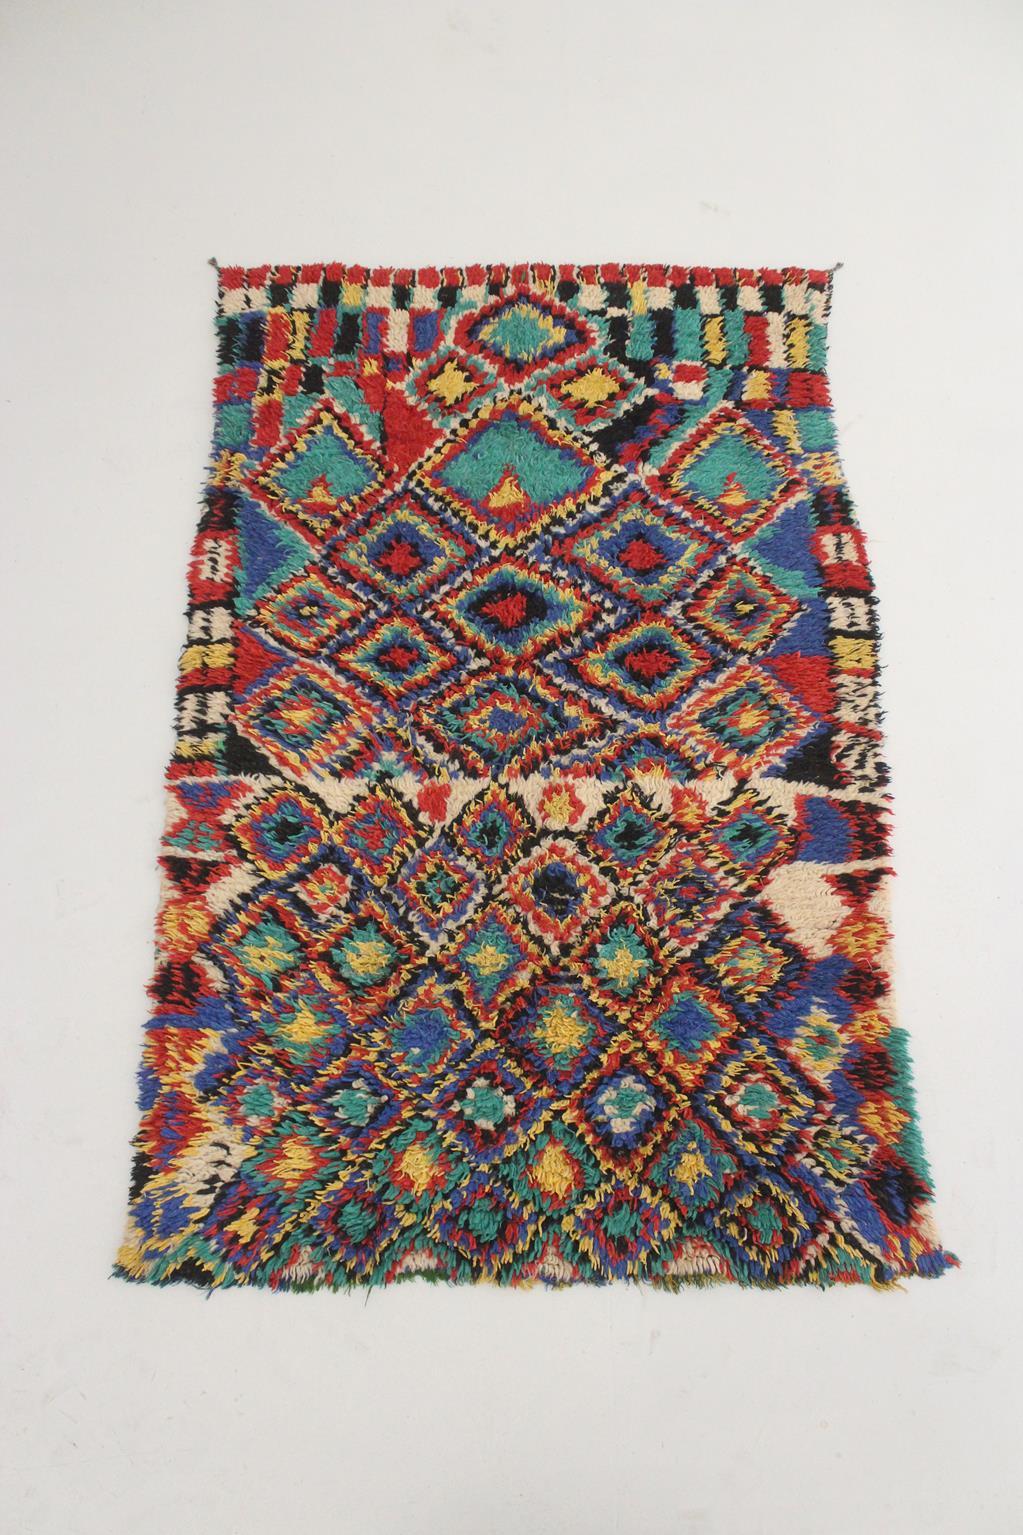 Honestly this one was an immediate yes! I have always loved a vintage, artistic Azilal rug with traditional berber designs: here a busy, multiplied, unregular diamond pattern with some rectangles on one ending. The colors are a turquoise green mixed